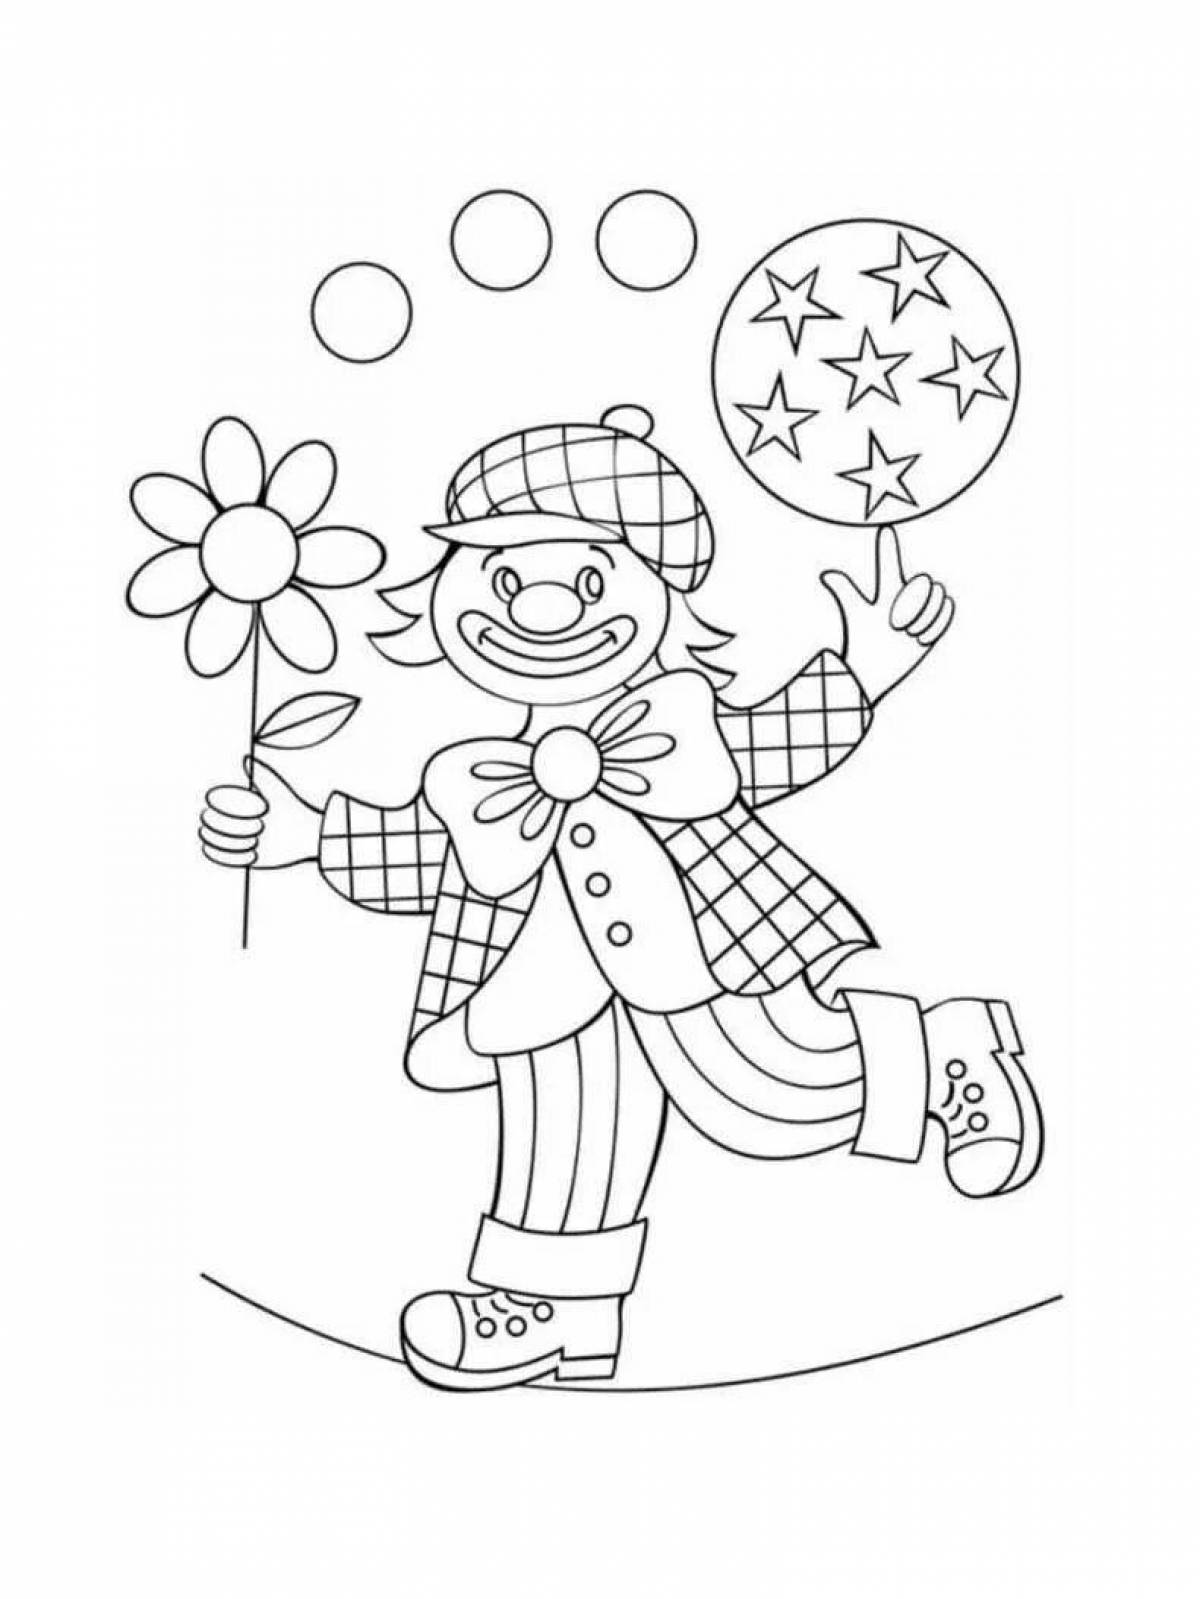 Live clown coloring pages for kids